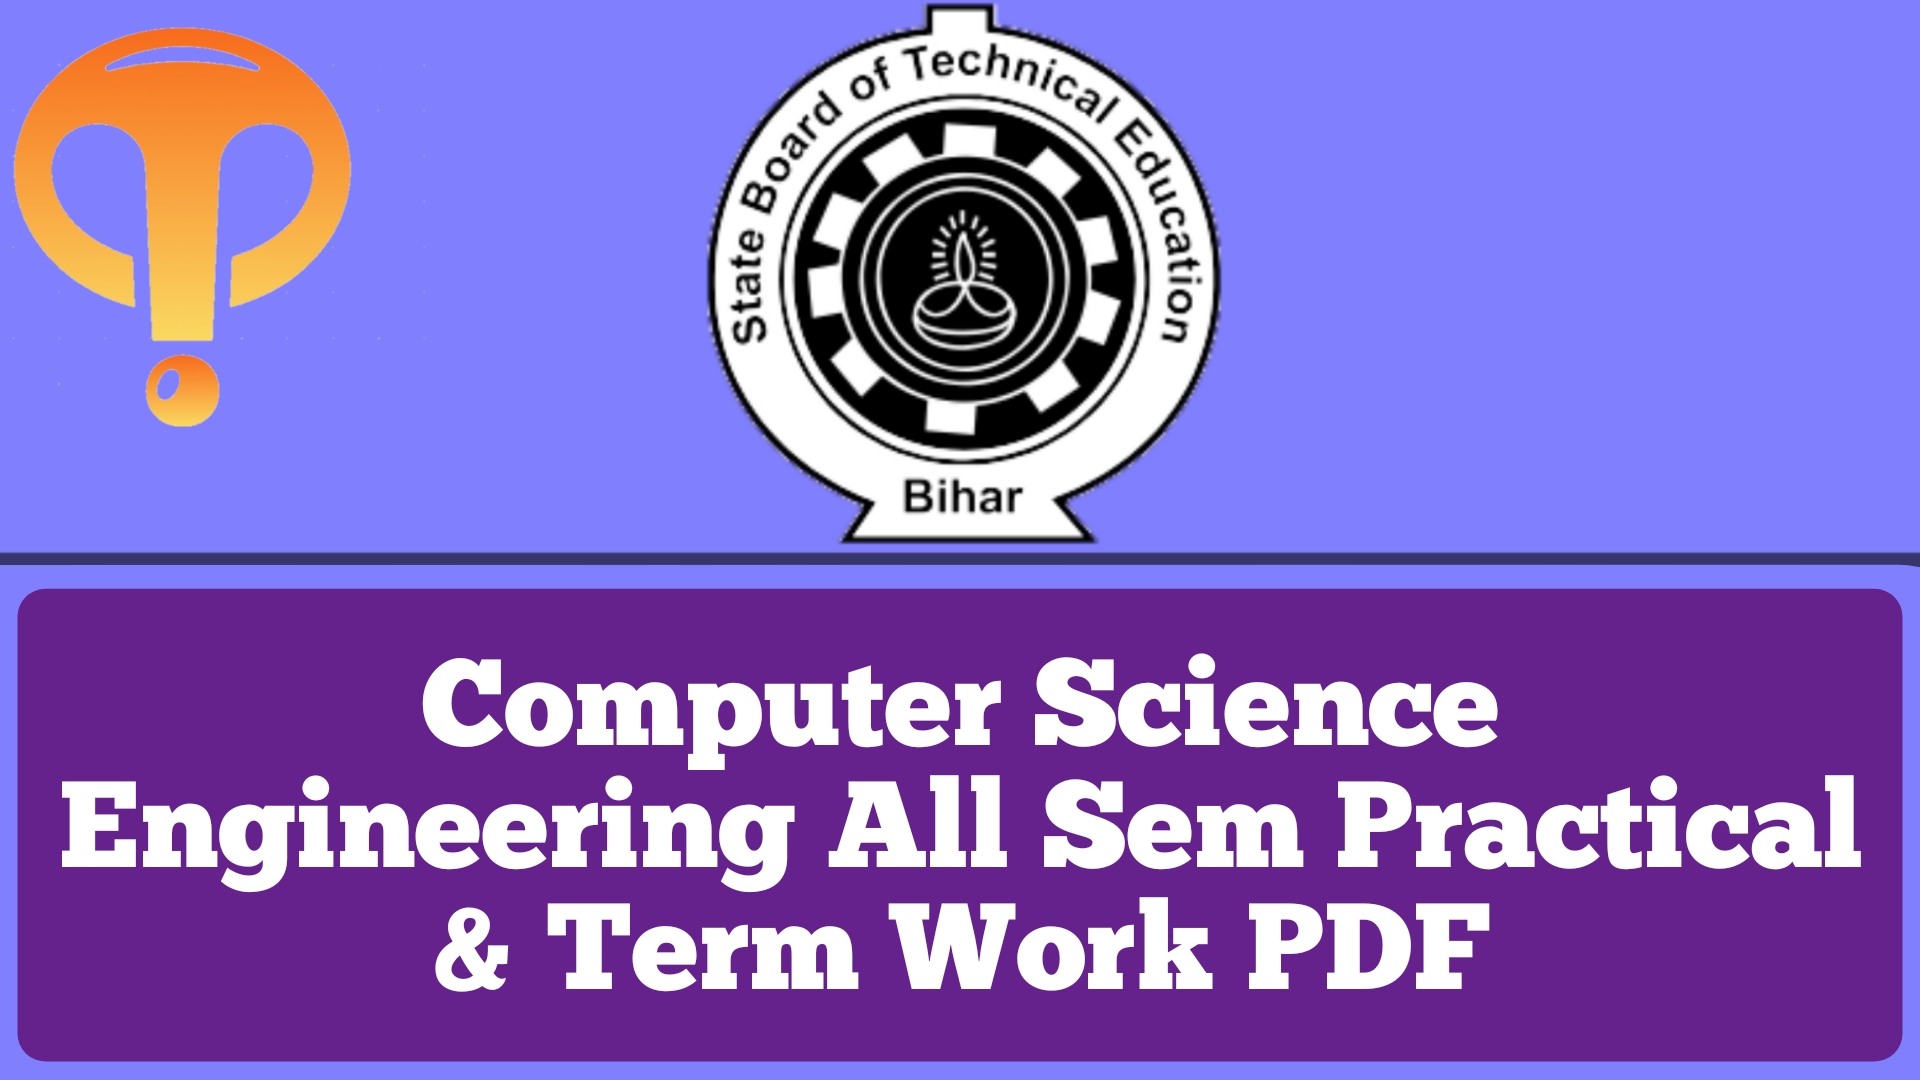 Computer Science all seem Practical pdf